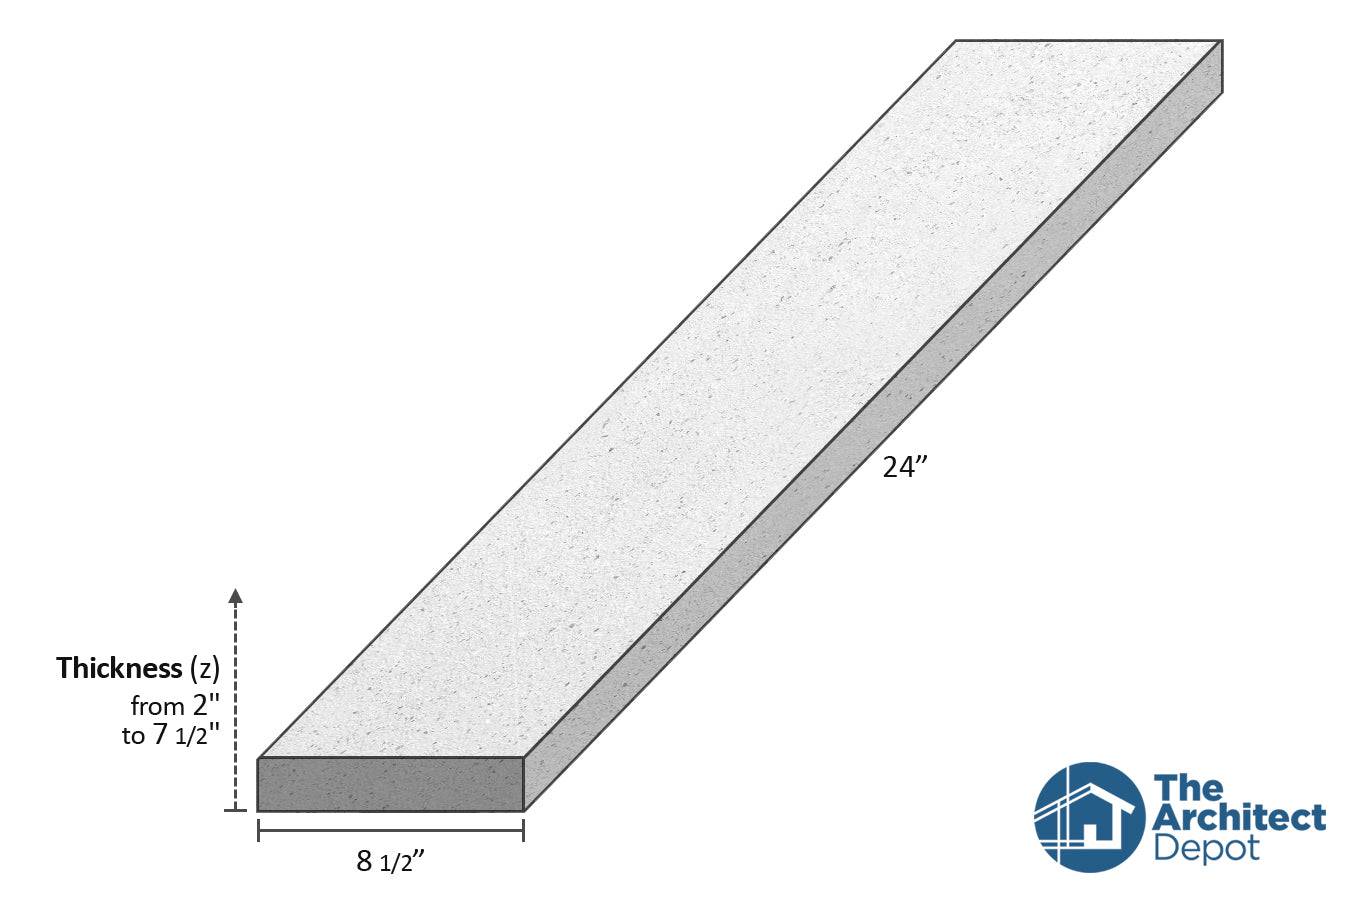 decorative concrete flat band moulding 24 x 8.5 use the decorative flat band moulding as an exterior moulding and give volume to the architecture of your building concrete flat bands can be use as a exterior window sill or exterior window trim as a simple crown molding decoration 